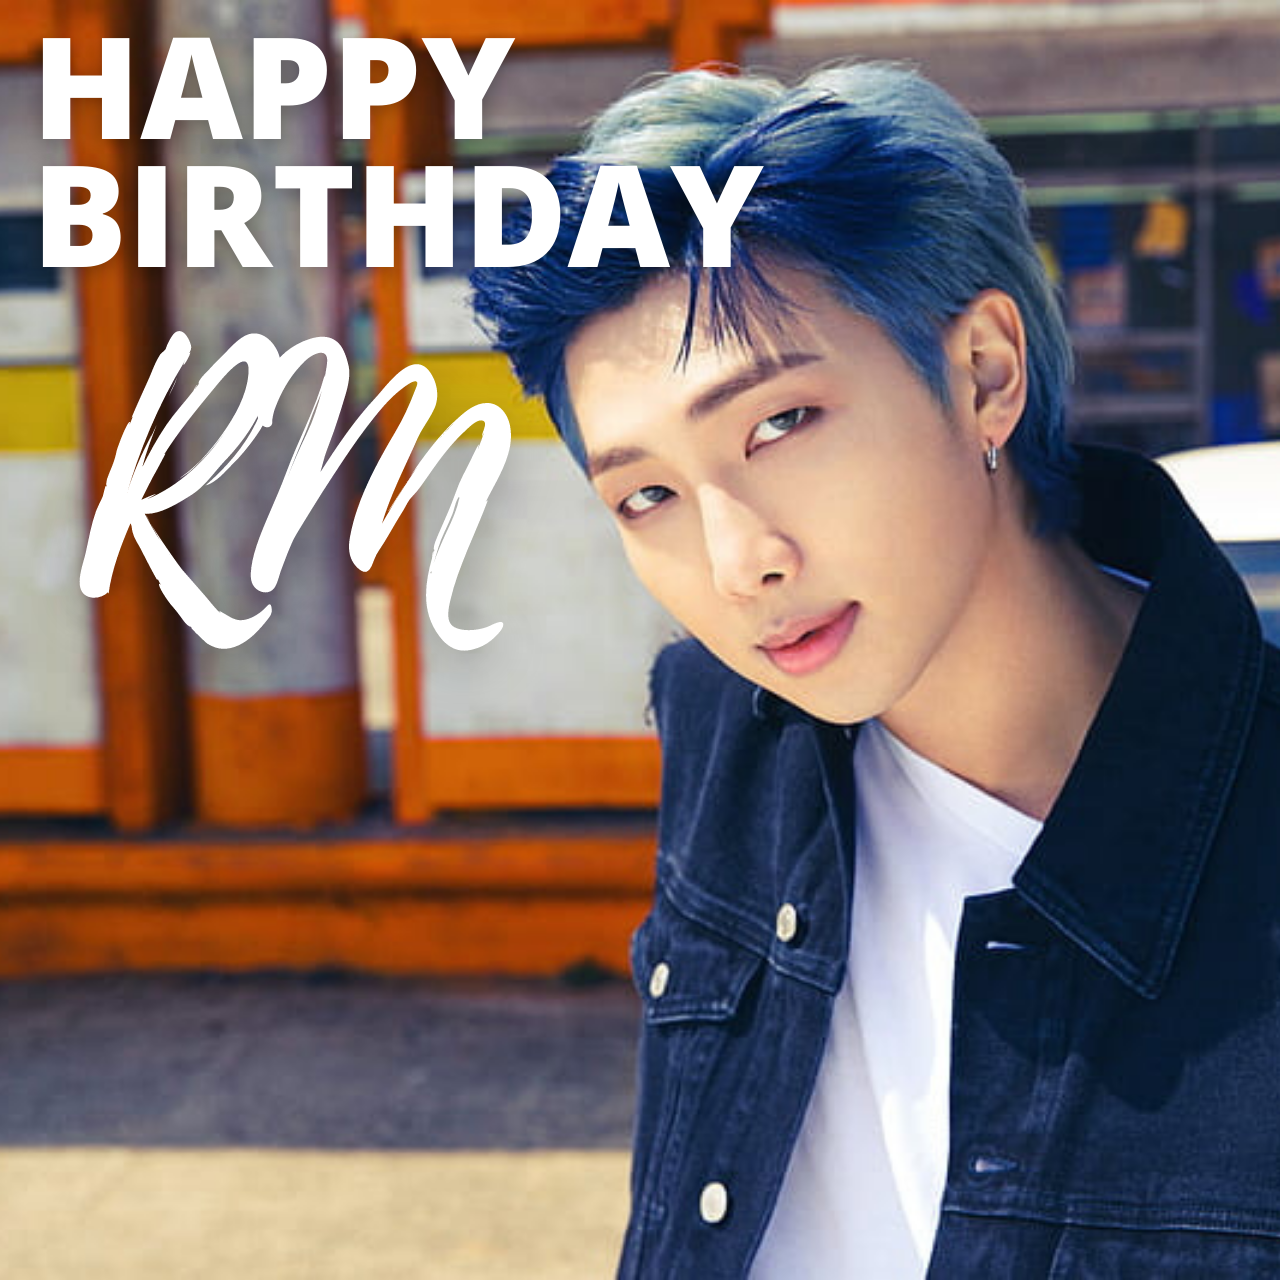 Happy Birthday Kim Namjoon: Wishes, Quotes, HD Images, and Messages to greet BTS Member RM